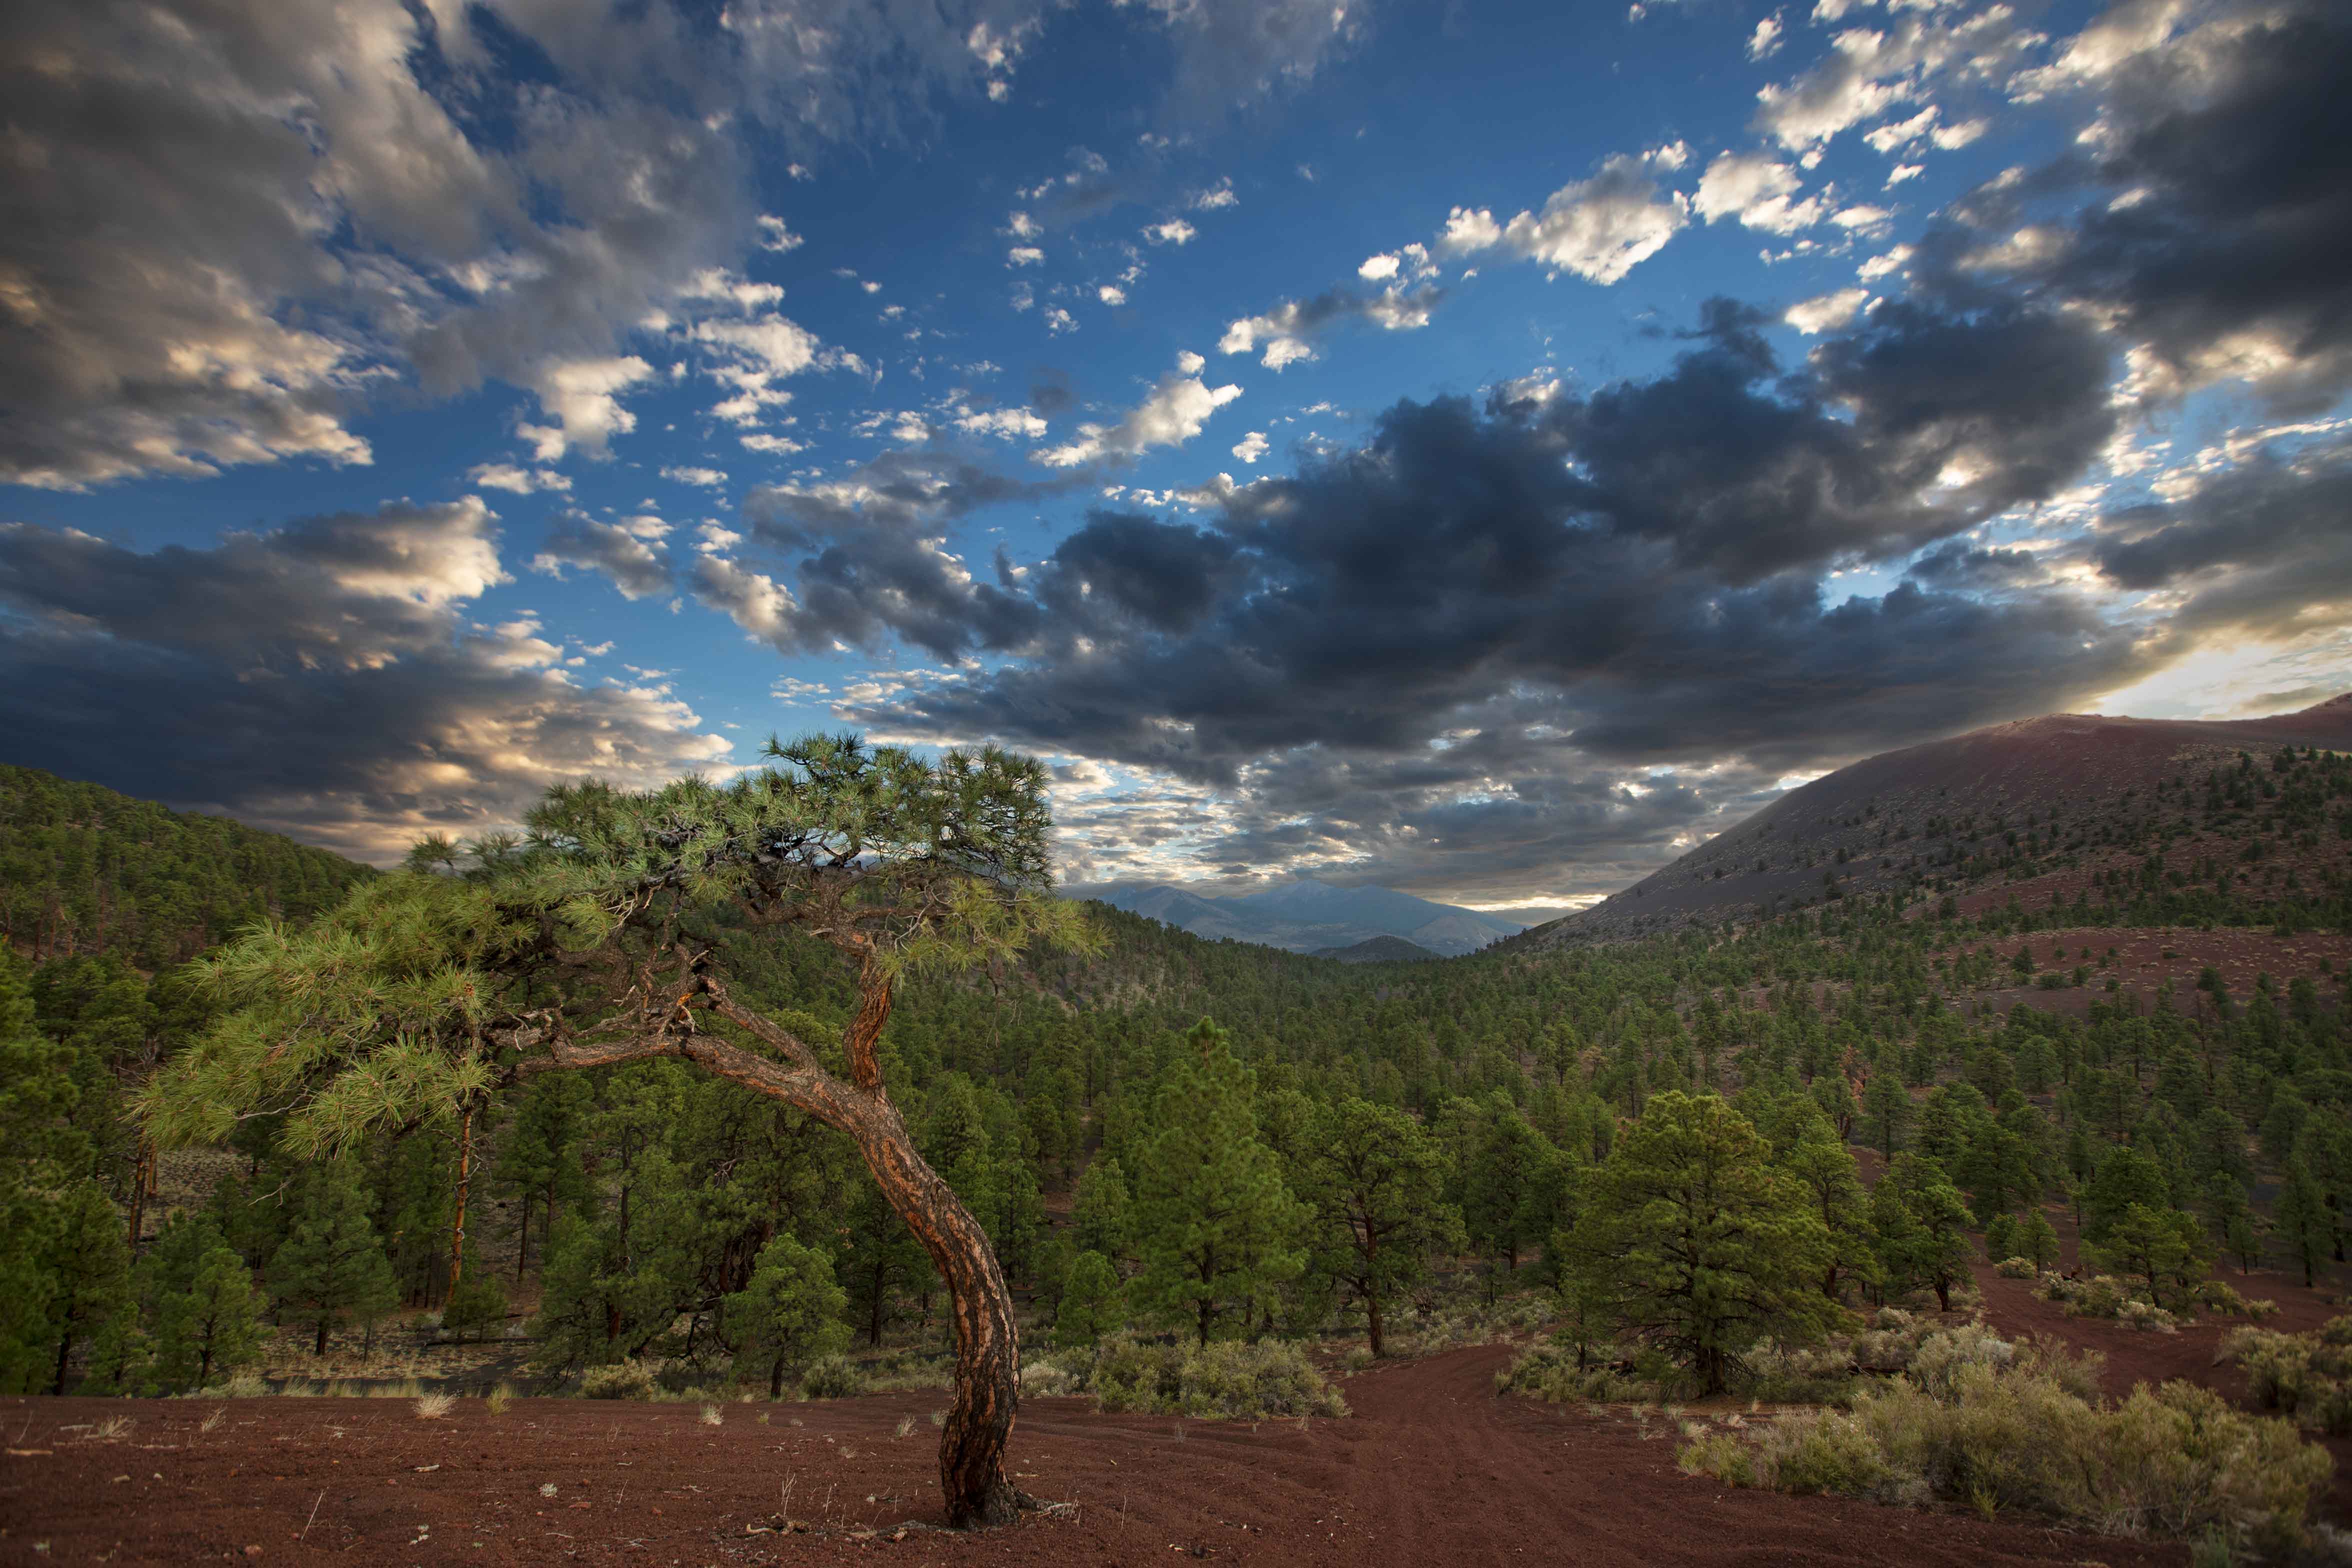 A Ponderosa pine forest in the Cinder Hills of northern Arizona. At right is Sunset Crater and in the distance are the San Francisco Peaks.